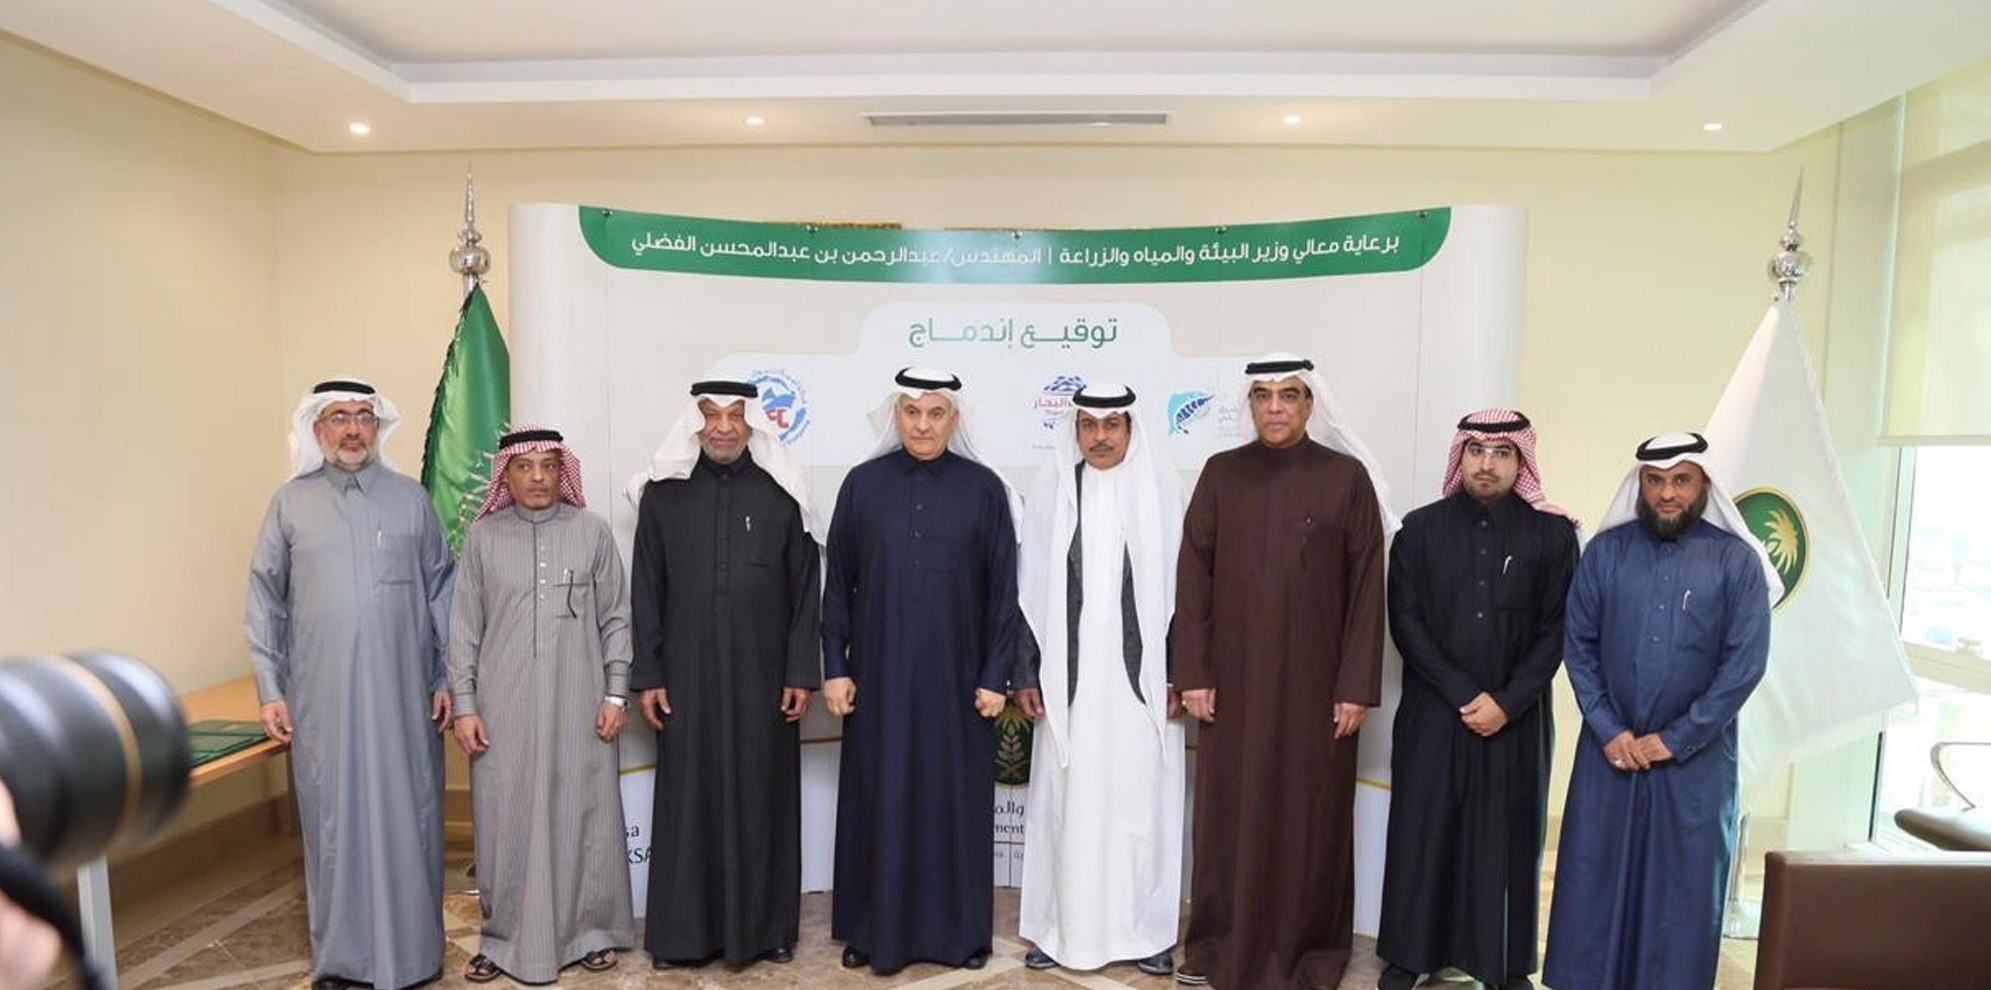 Signing ceremony for the merging of four Saudi aquaculture companies to form a new entity